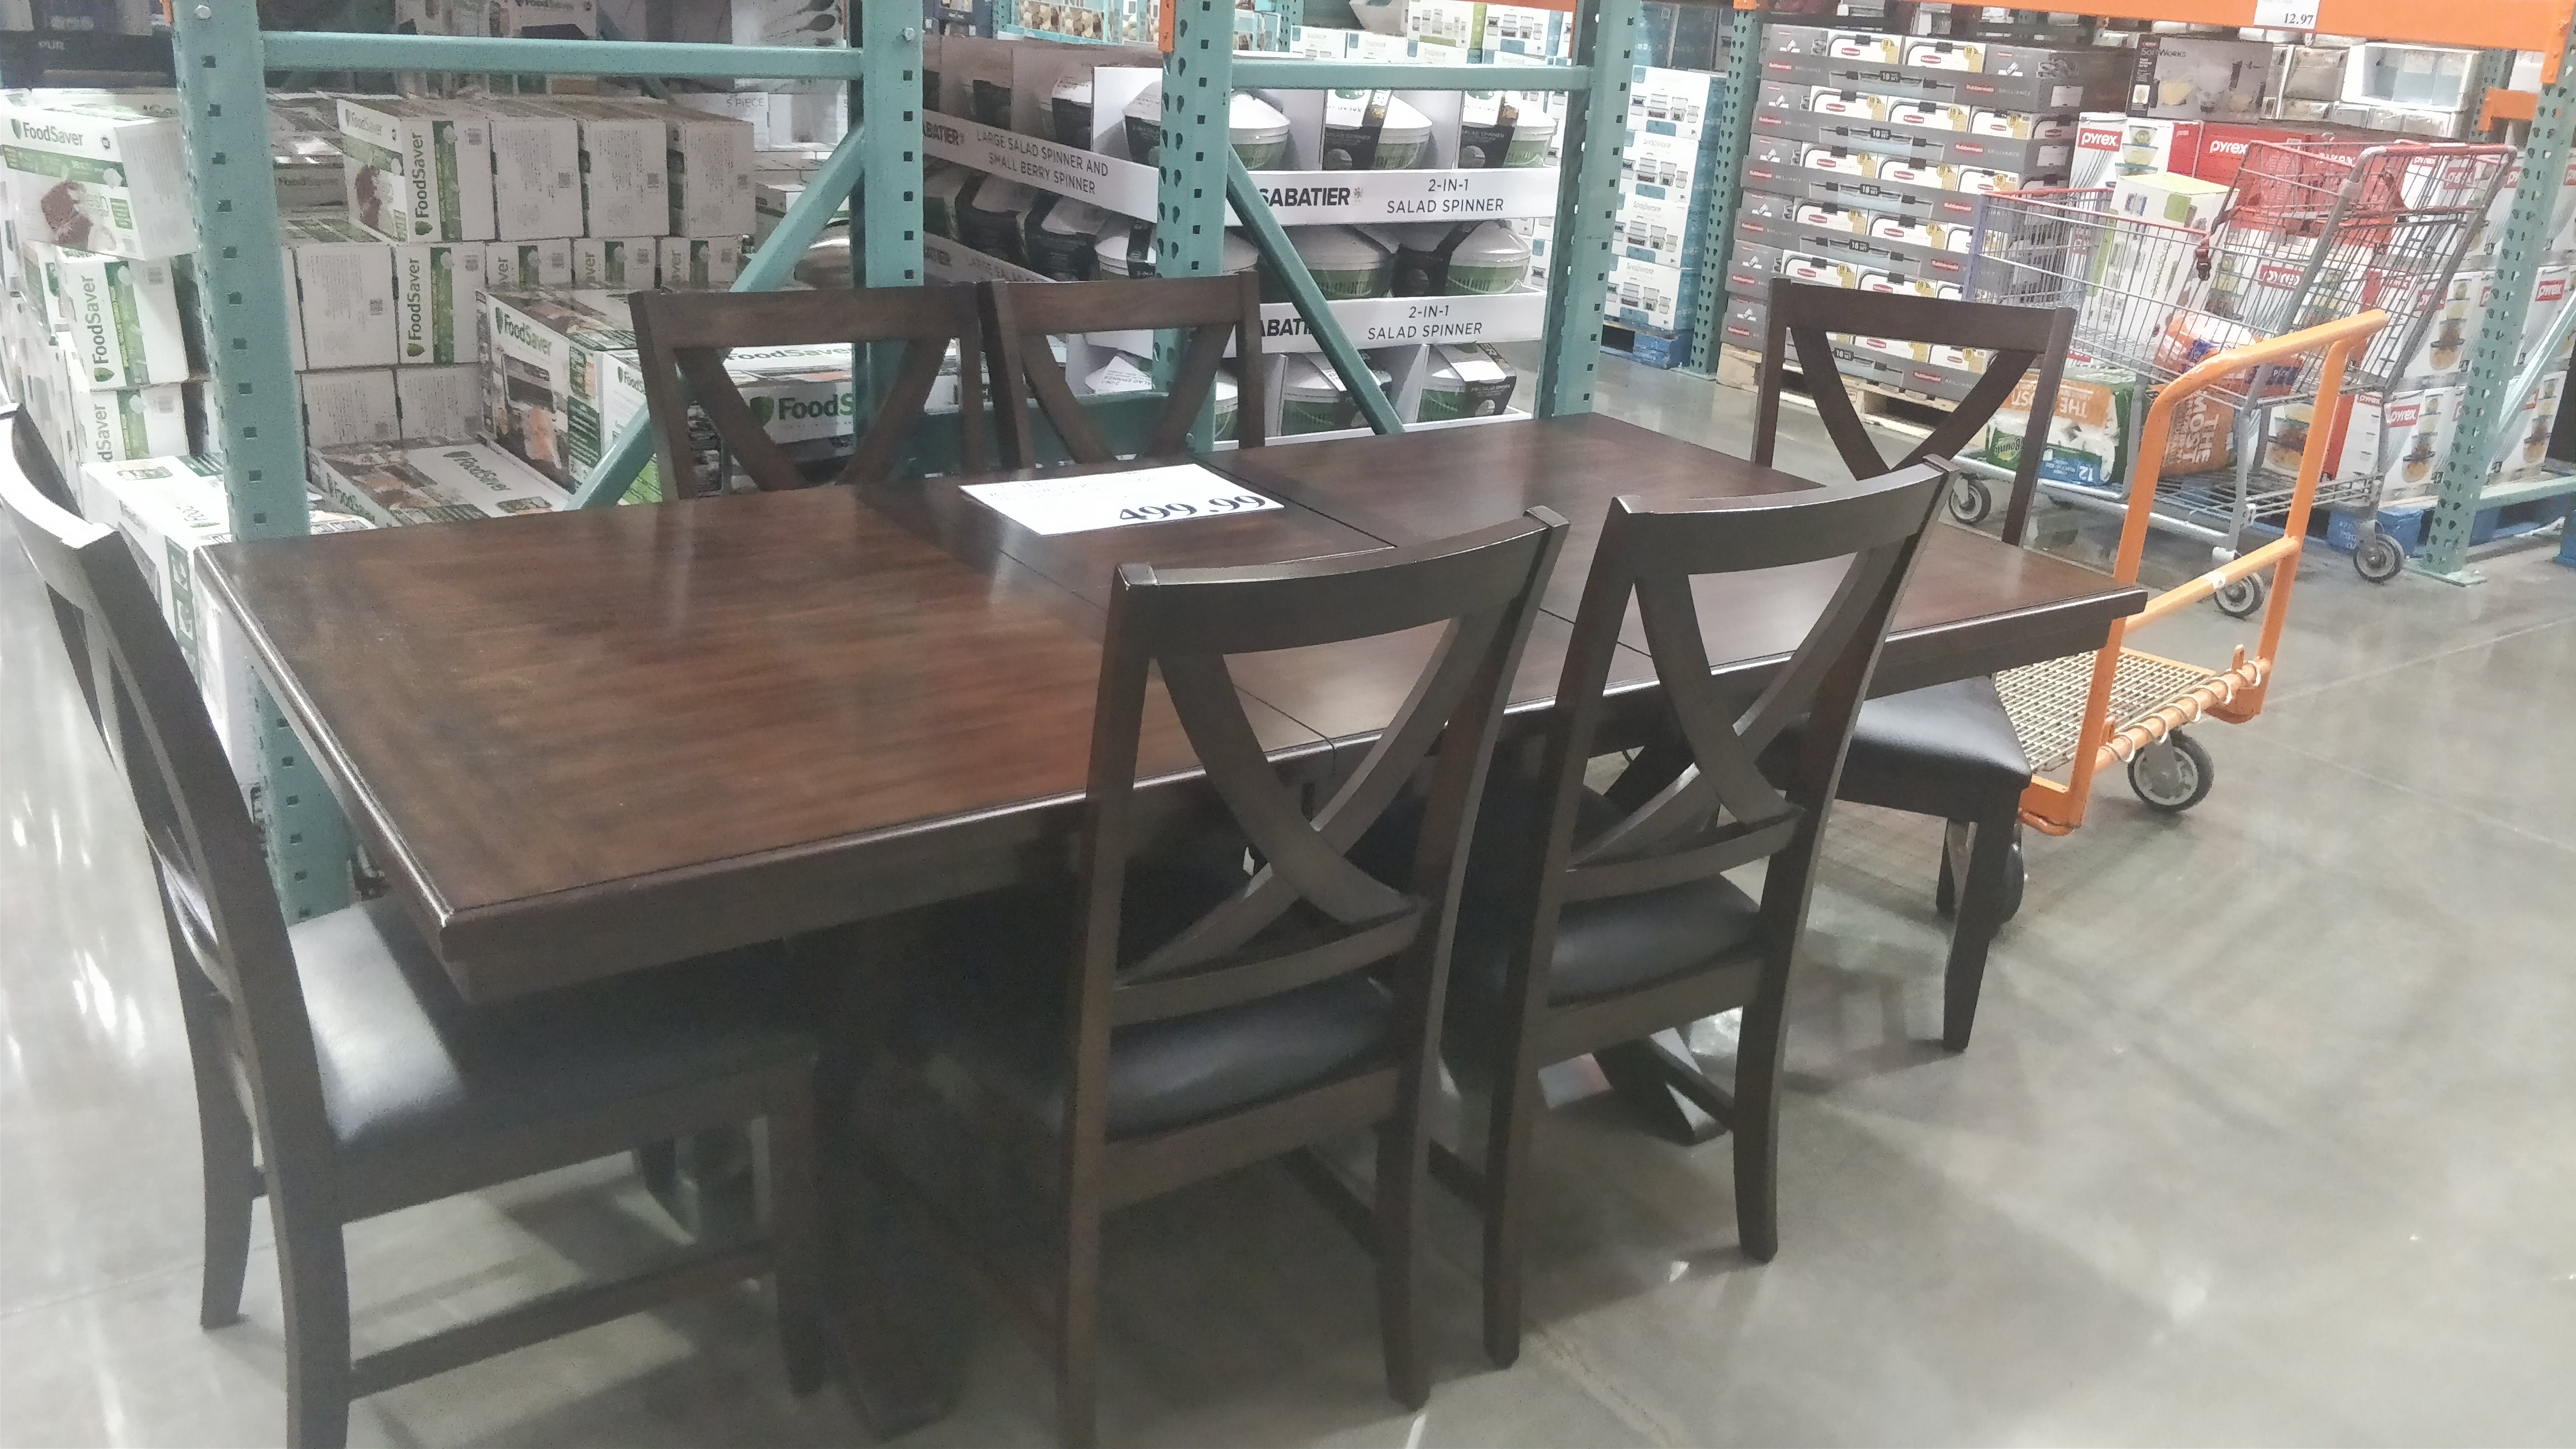 Bayside 7 Piece Dining Set 499 99 At Costco In Store Only